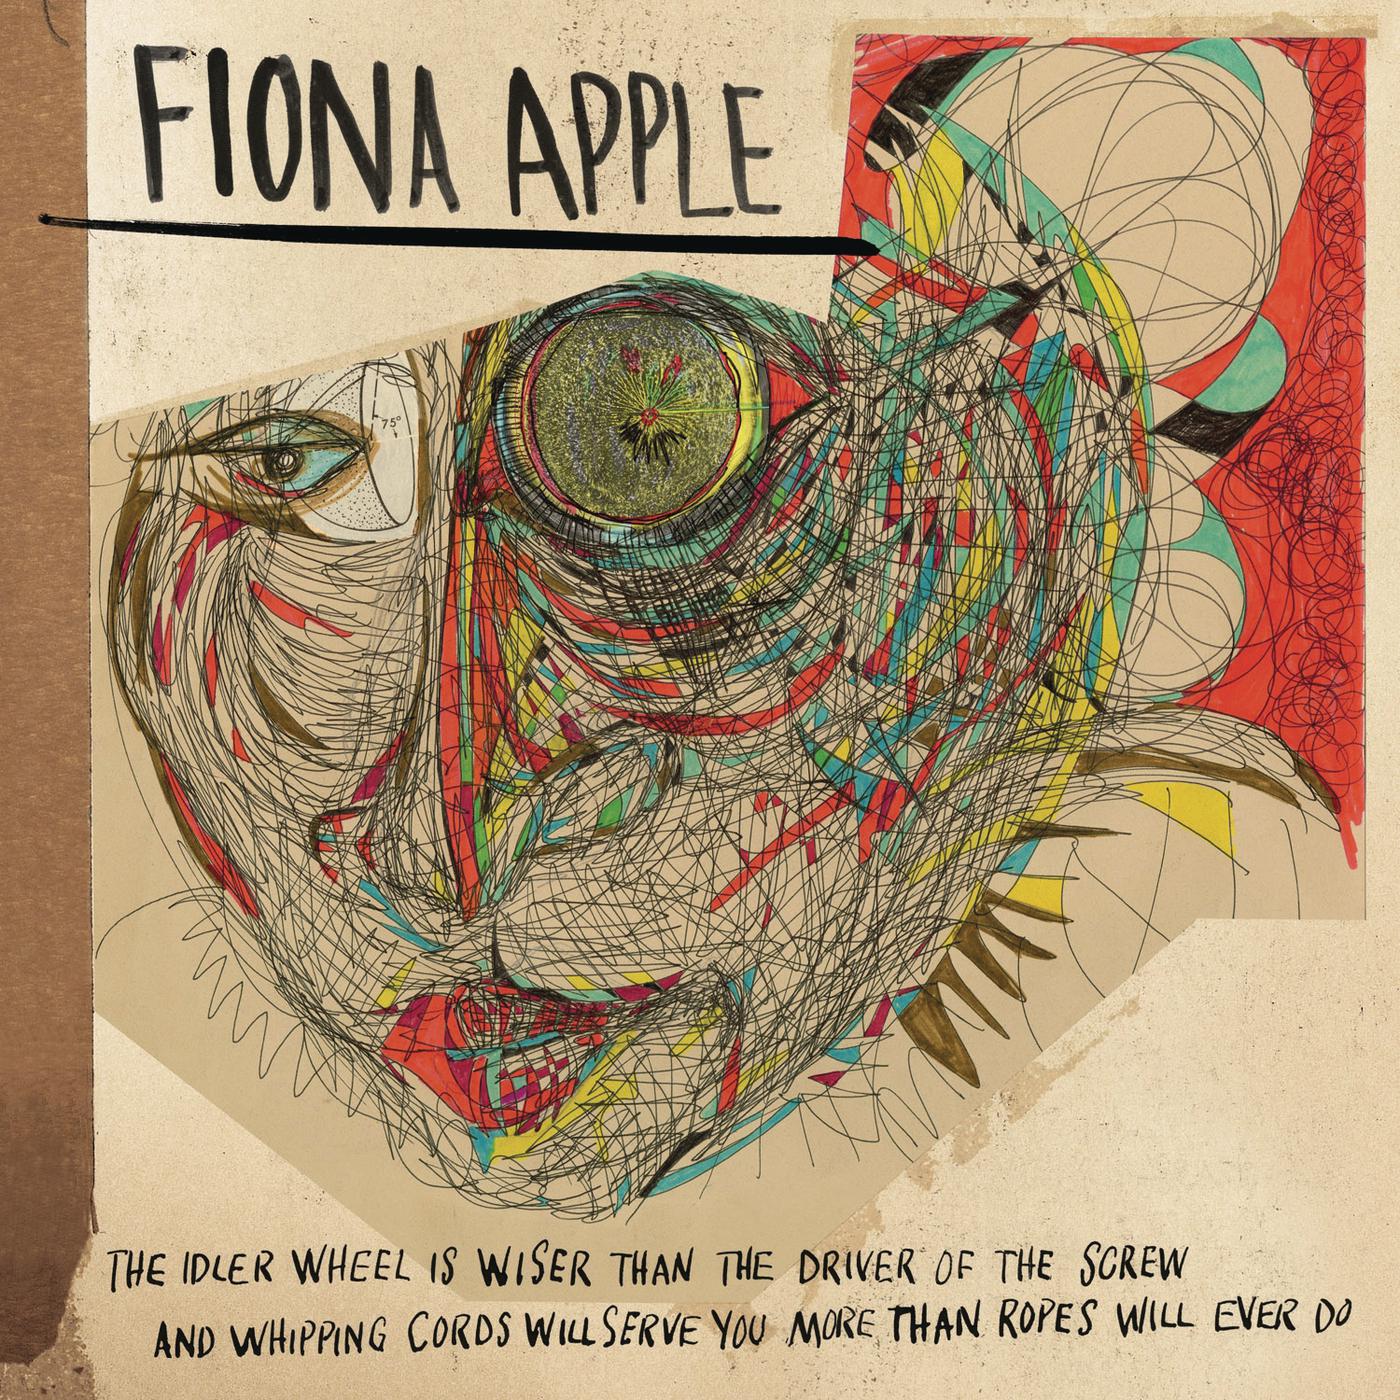 Every Single Night歌词 歌手Fiona Apple-专辑The Idler Wheel Is Wiser Than the Driver of the Screw and Whipping Cords Will Serve You More Than Ropes Will Ever Do (Expanded Edition)-单曲《Every Single Night》LRC歌词下载